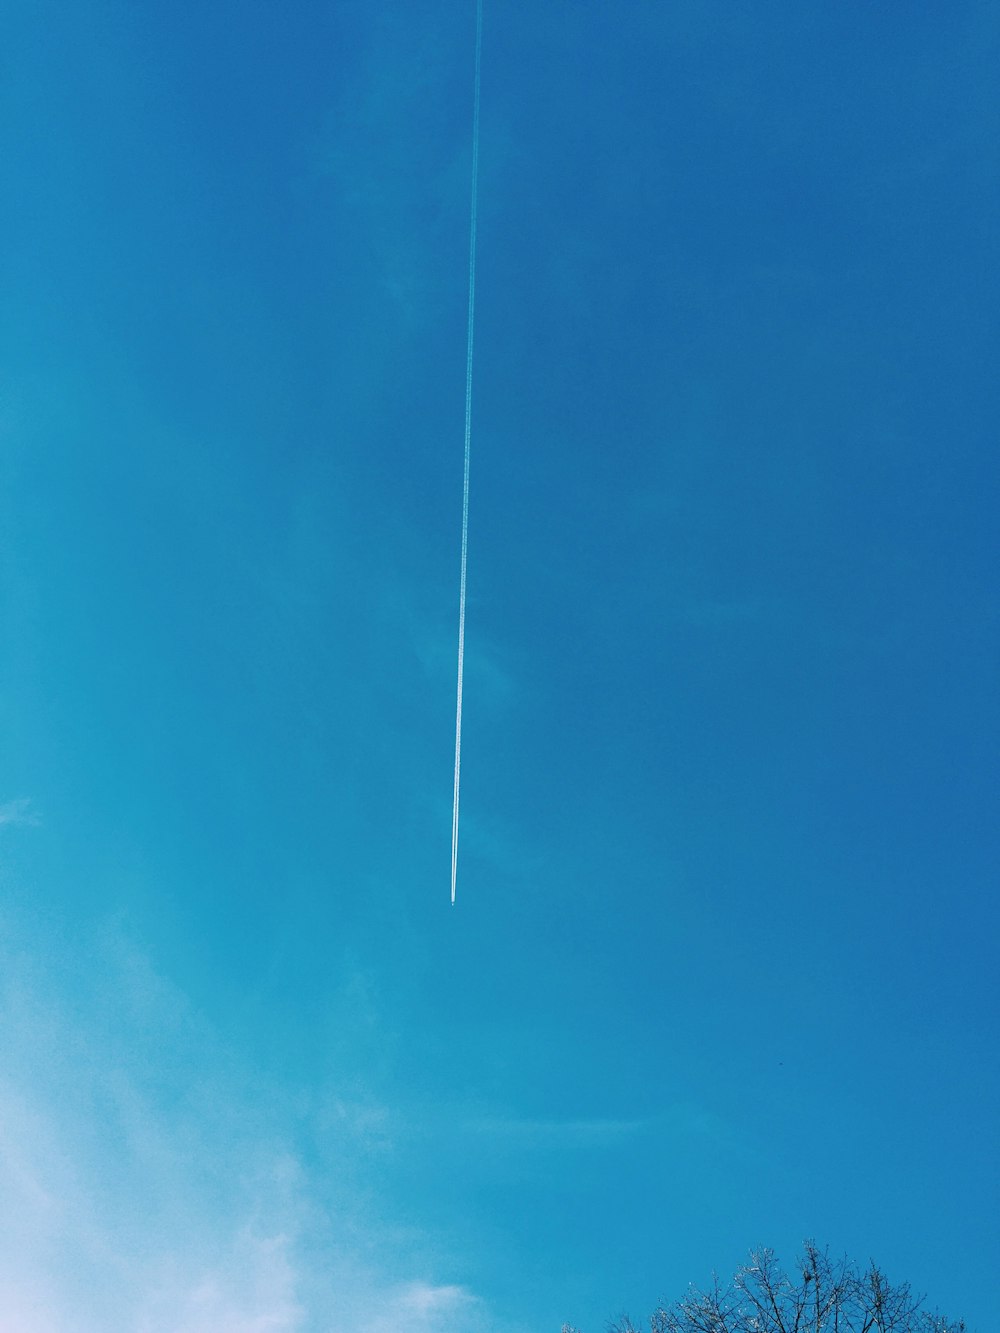 low angle view of plane contrail